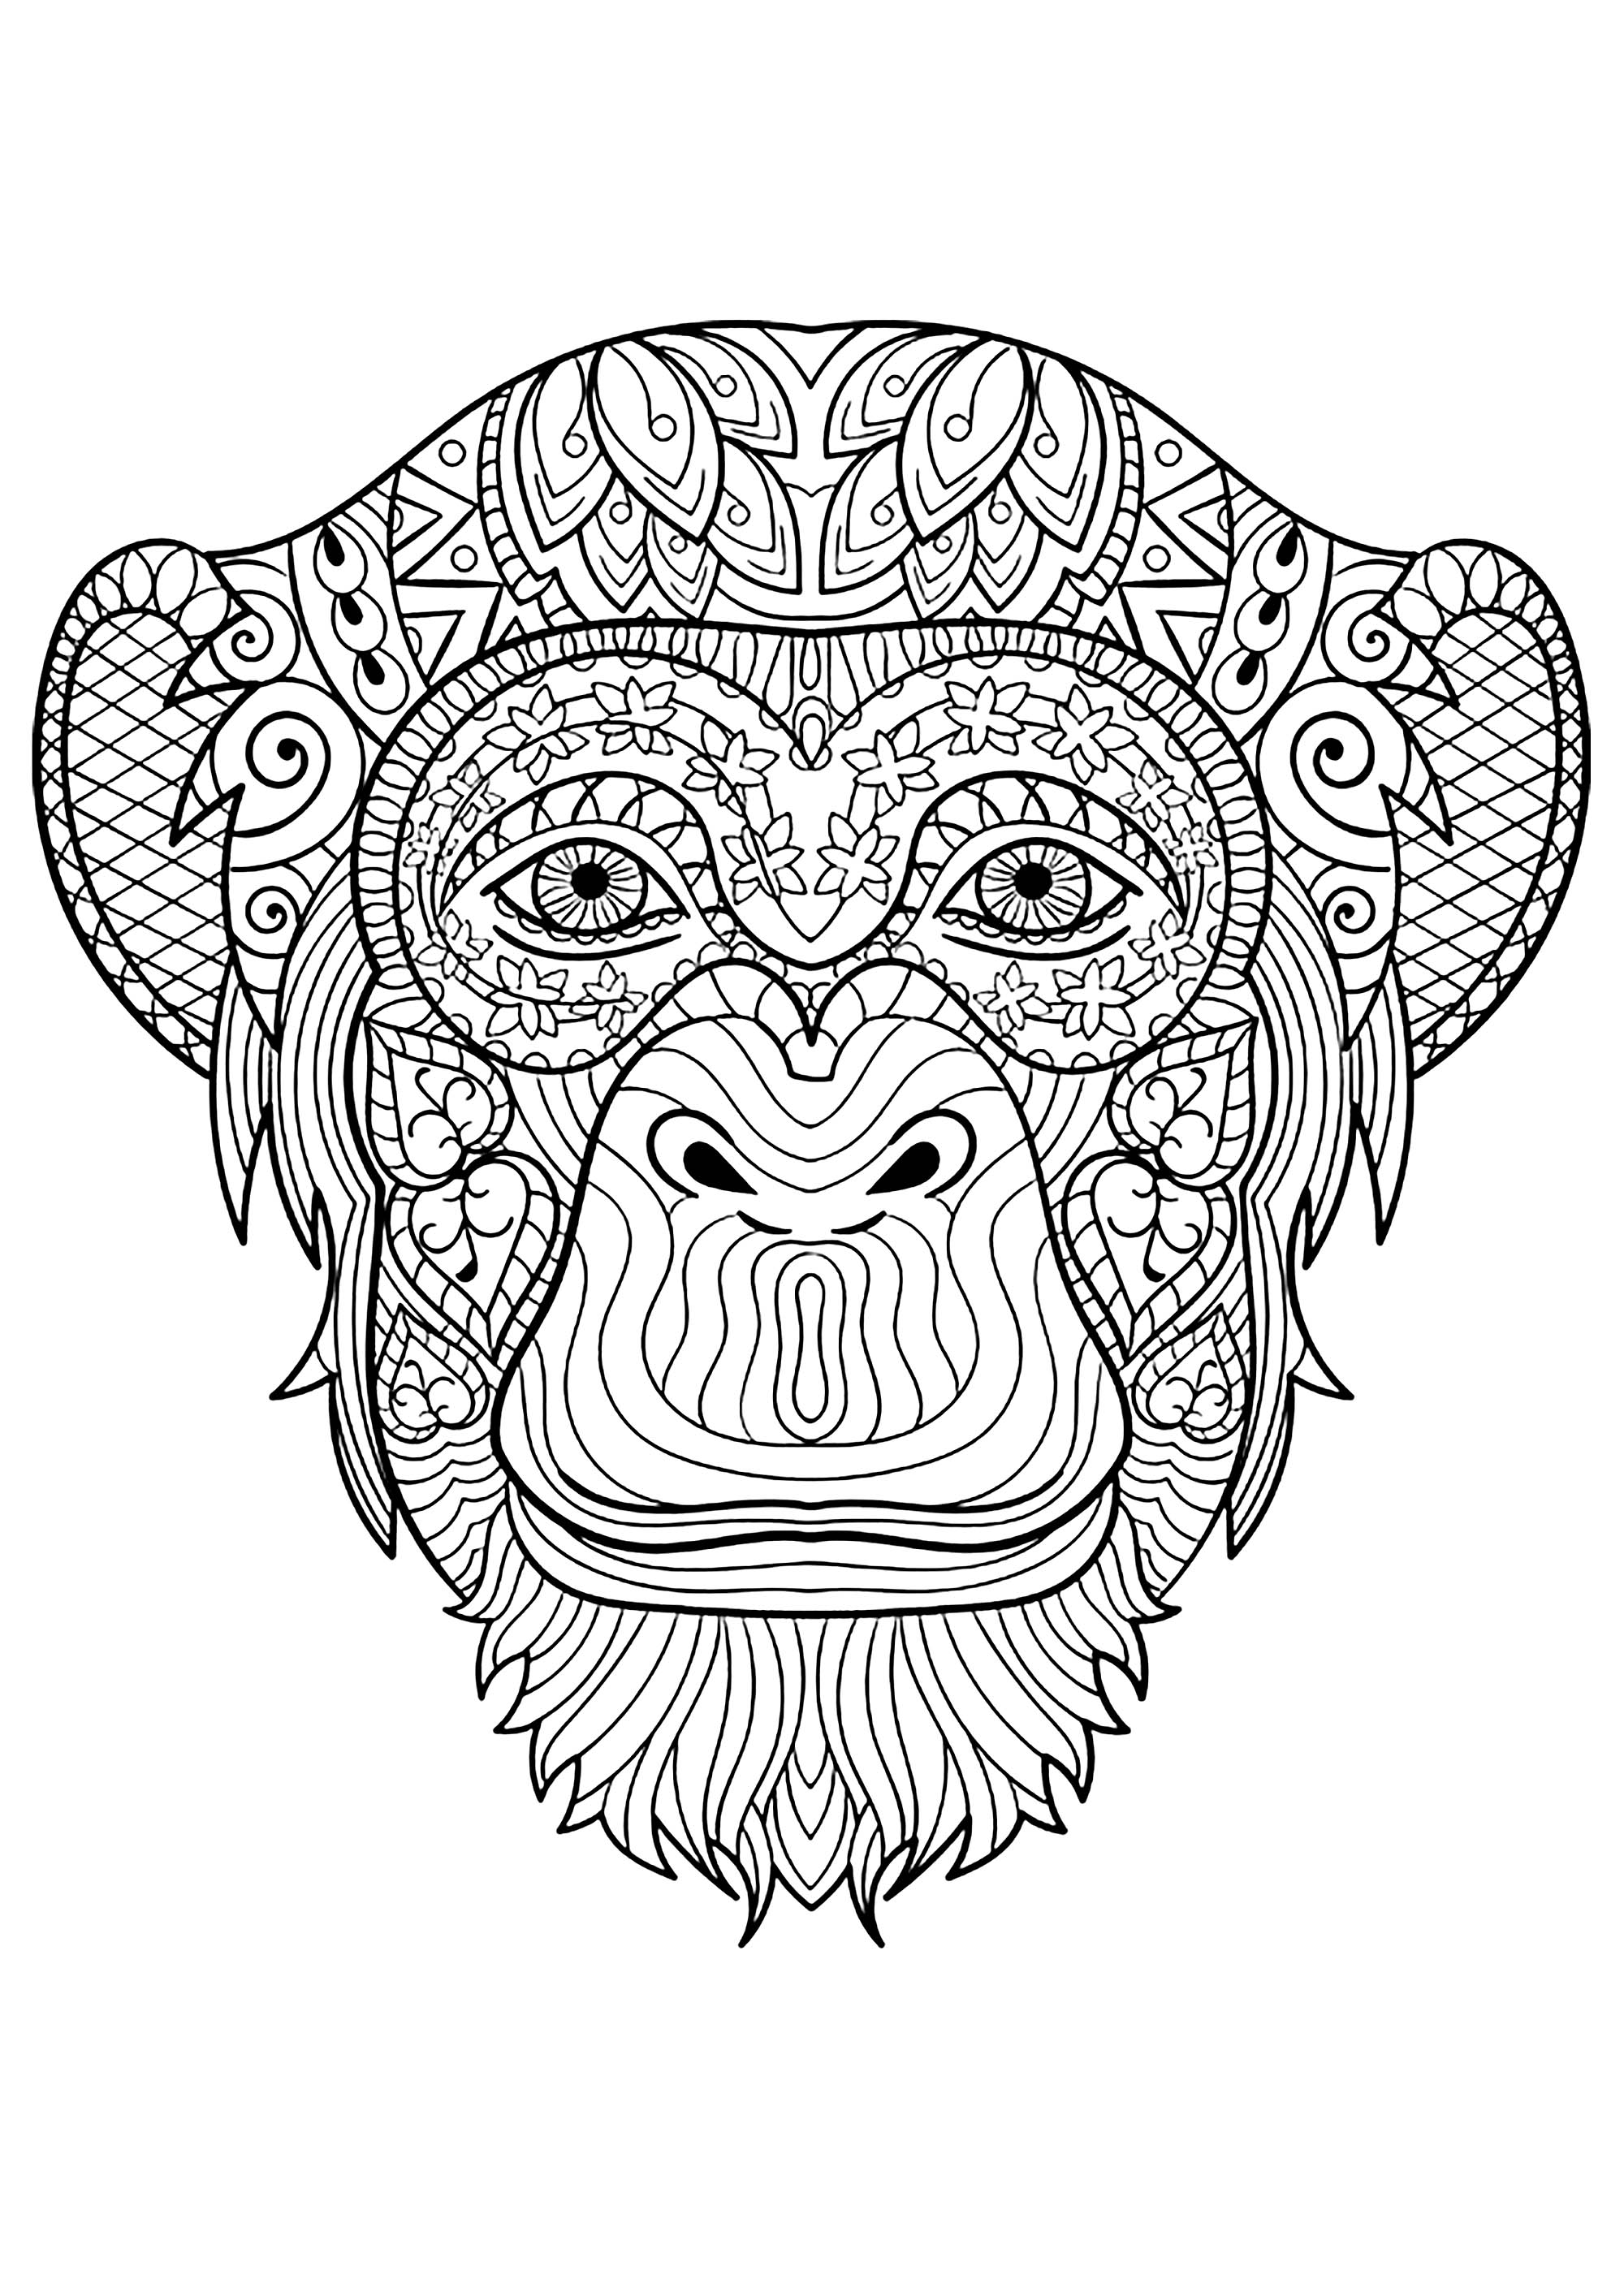 Monkey Coloring Pages to Print for Kids